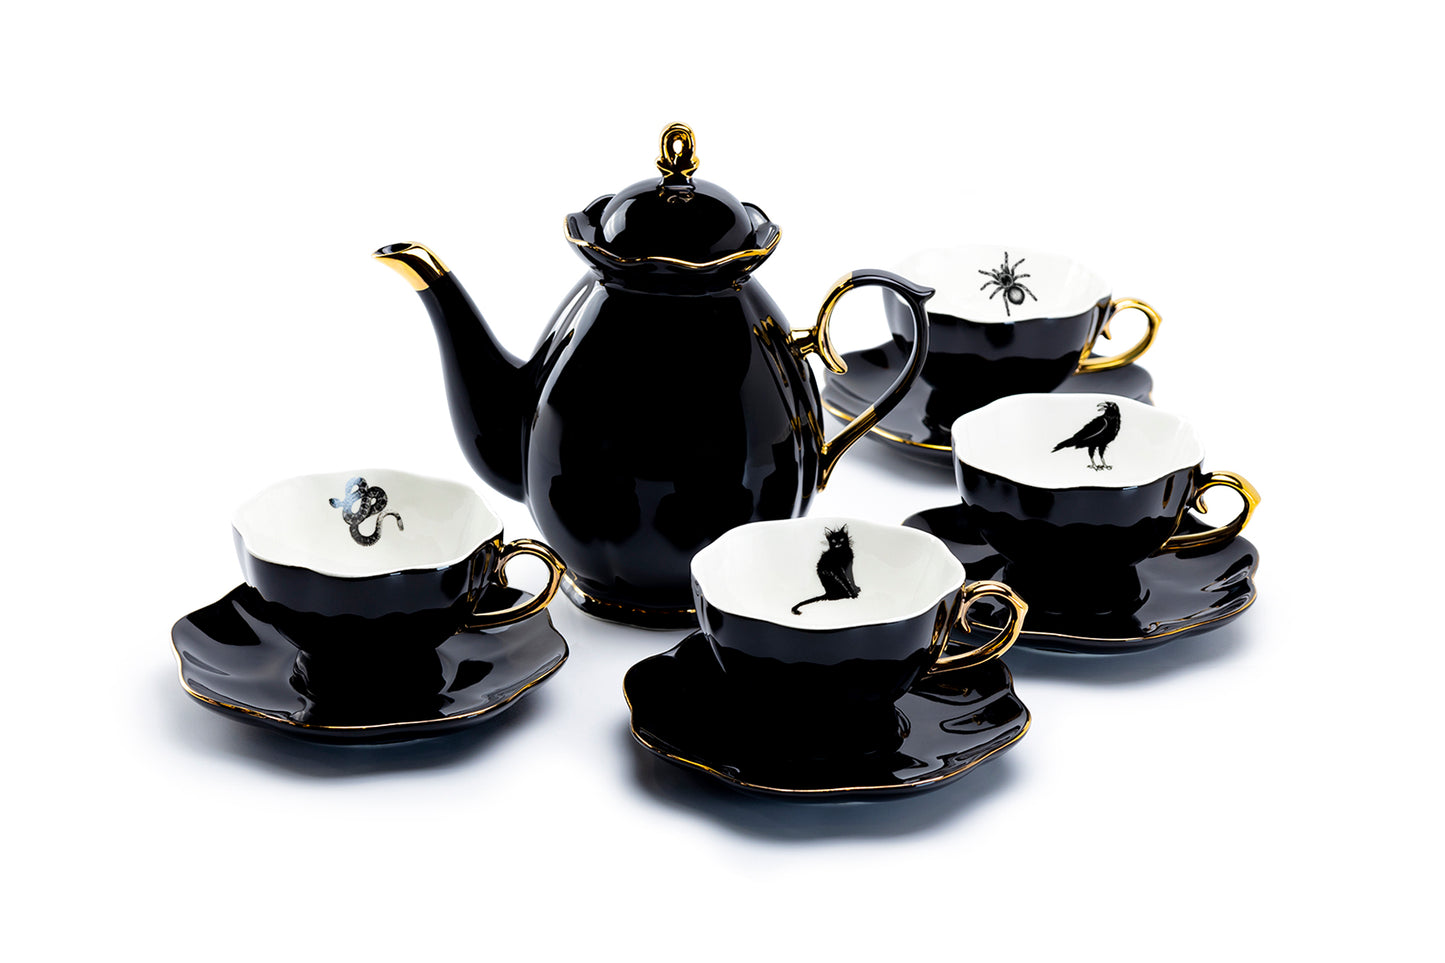 Black Gold Scallop Teapot + 4 Assorted Halloween Tea Cup and Saucer Sets - Cat, Raven, Snake, Spider tea cups